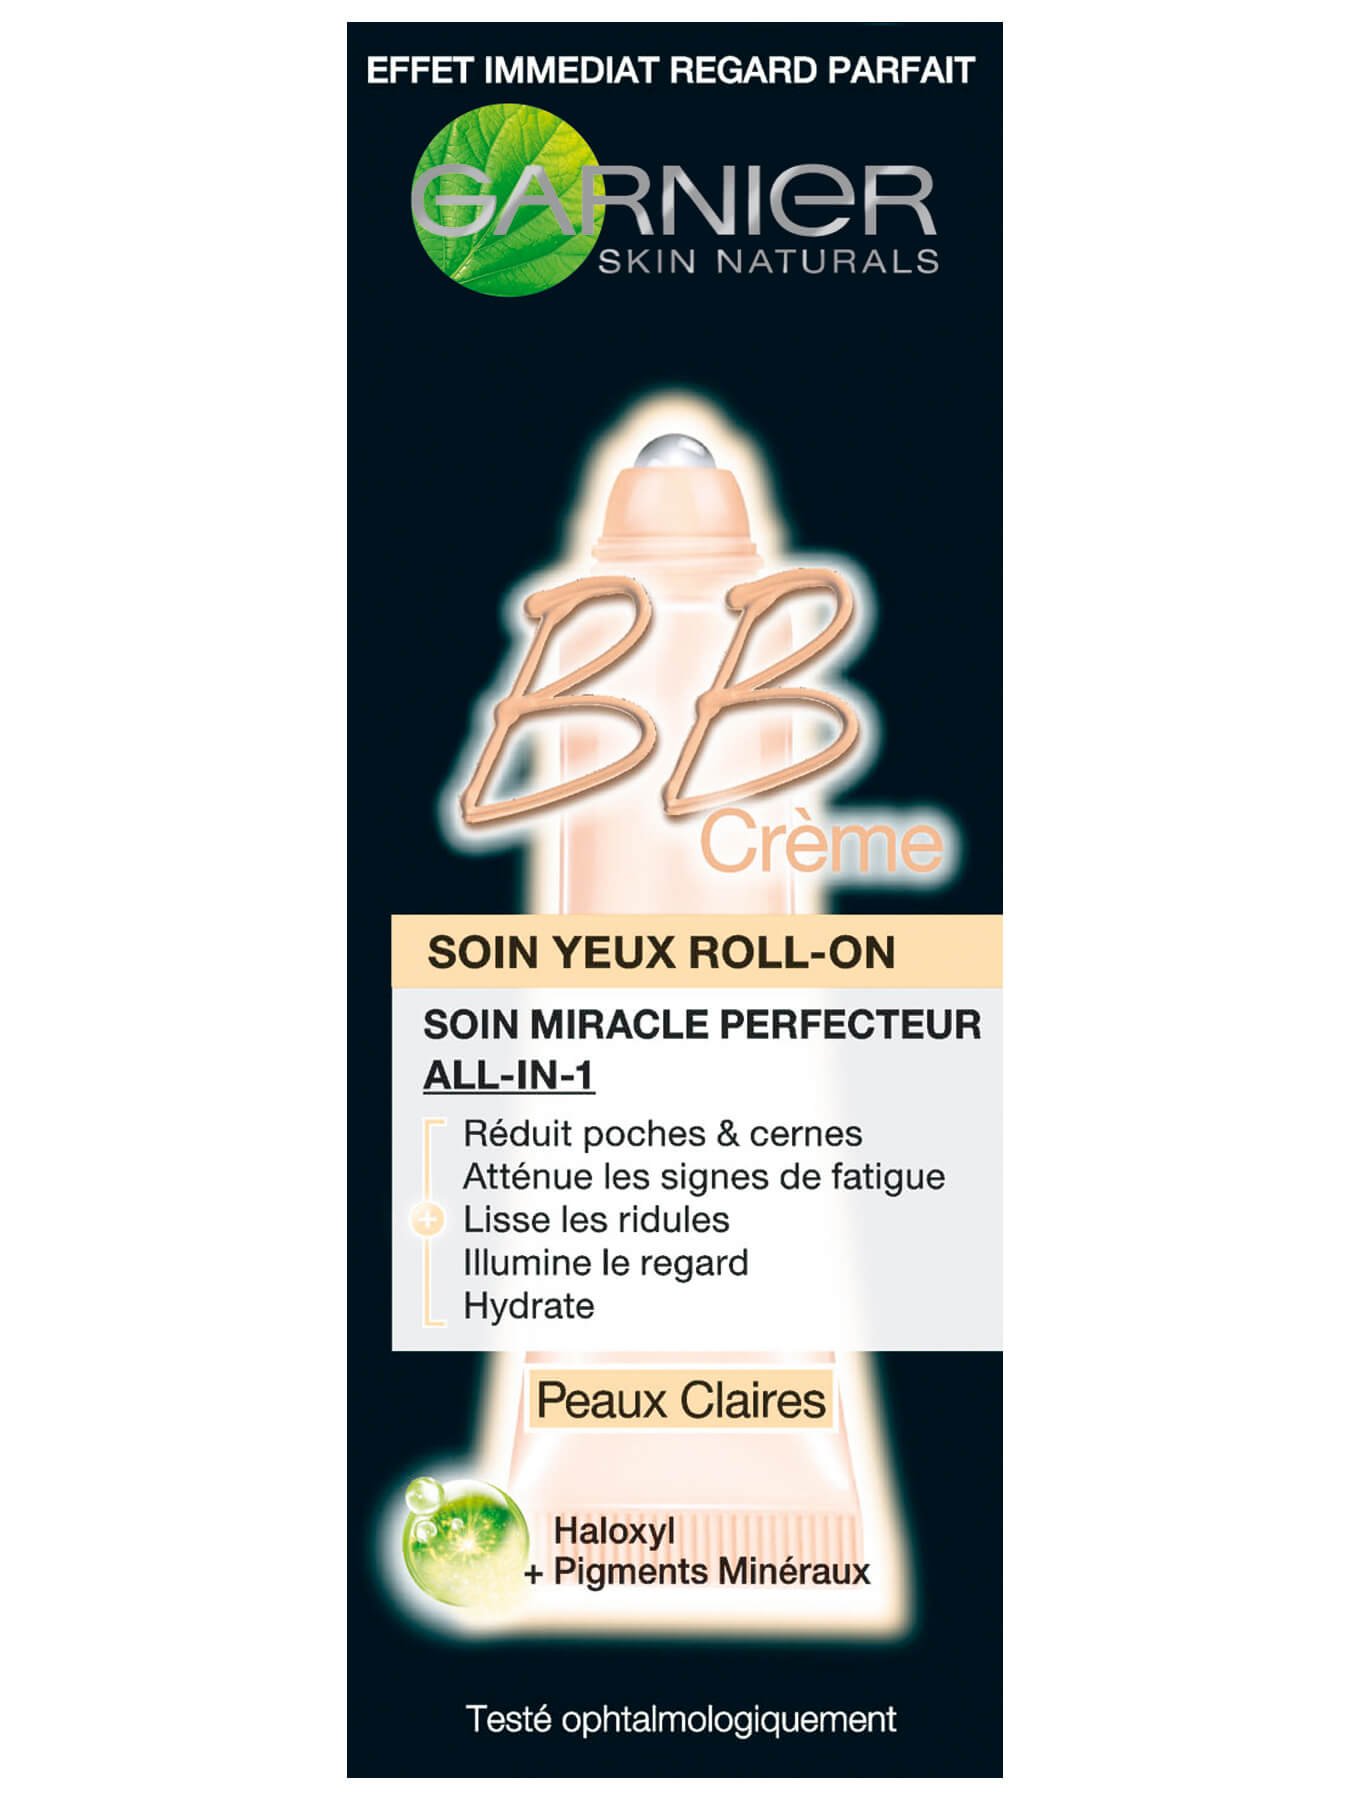 Skin naturals_BBcream roller yeux_peaux claires_FR